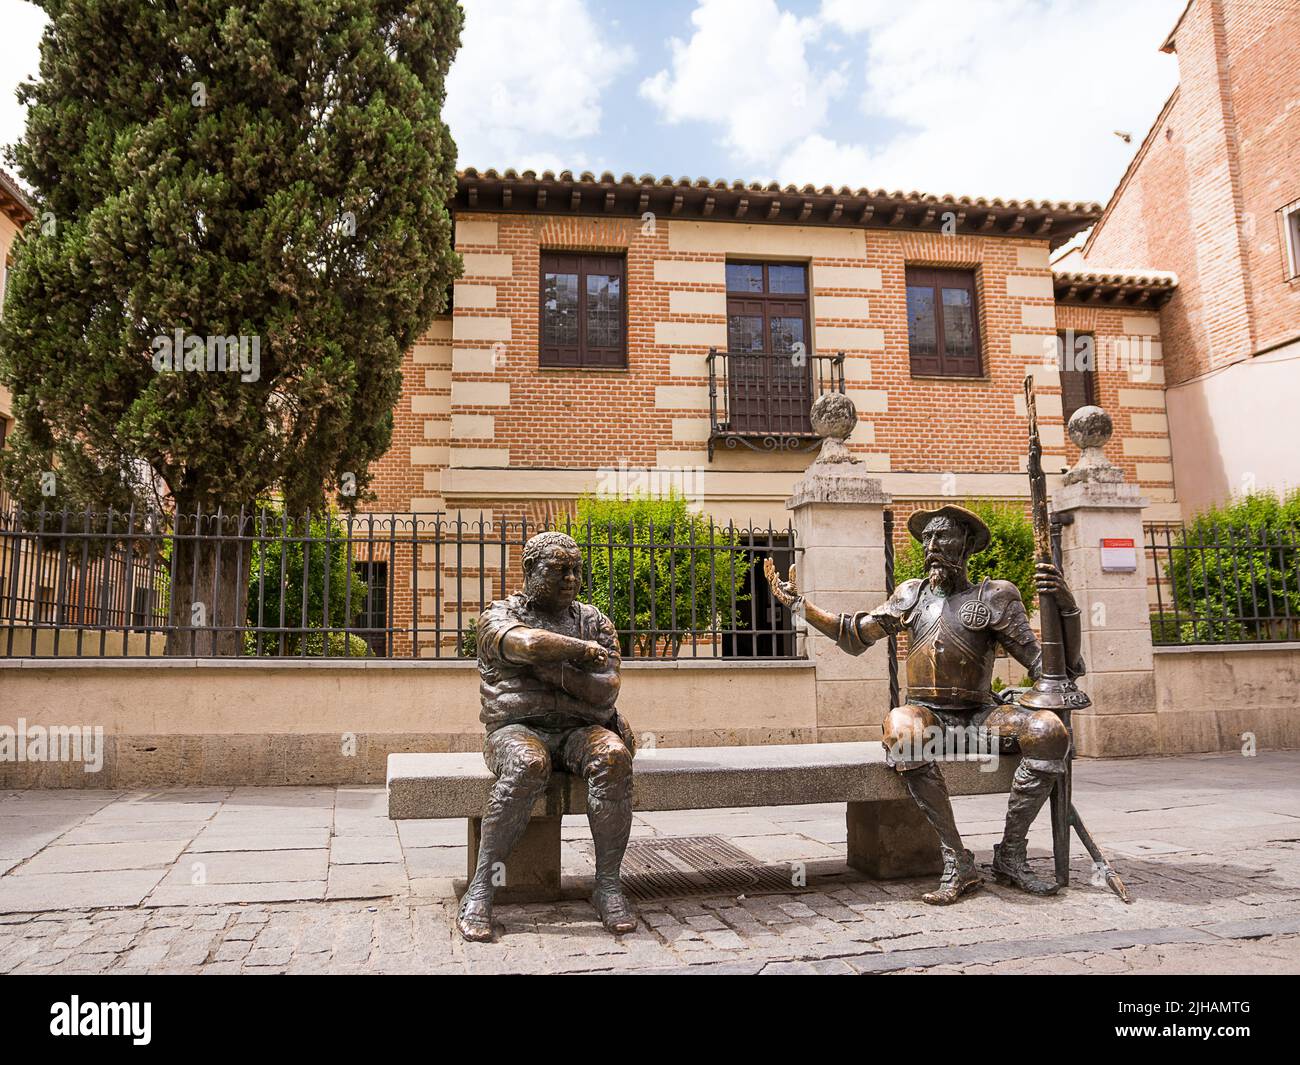 Alcalá de Henares, Spain - June 18, 2022: The statues of Don Quixote and Sancho Panza in the foreground and in the background the house museum birthpl Stock Photo